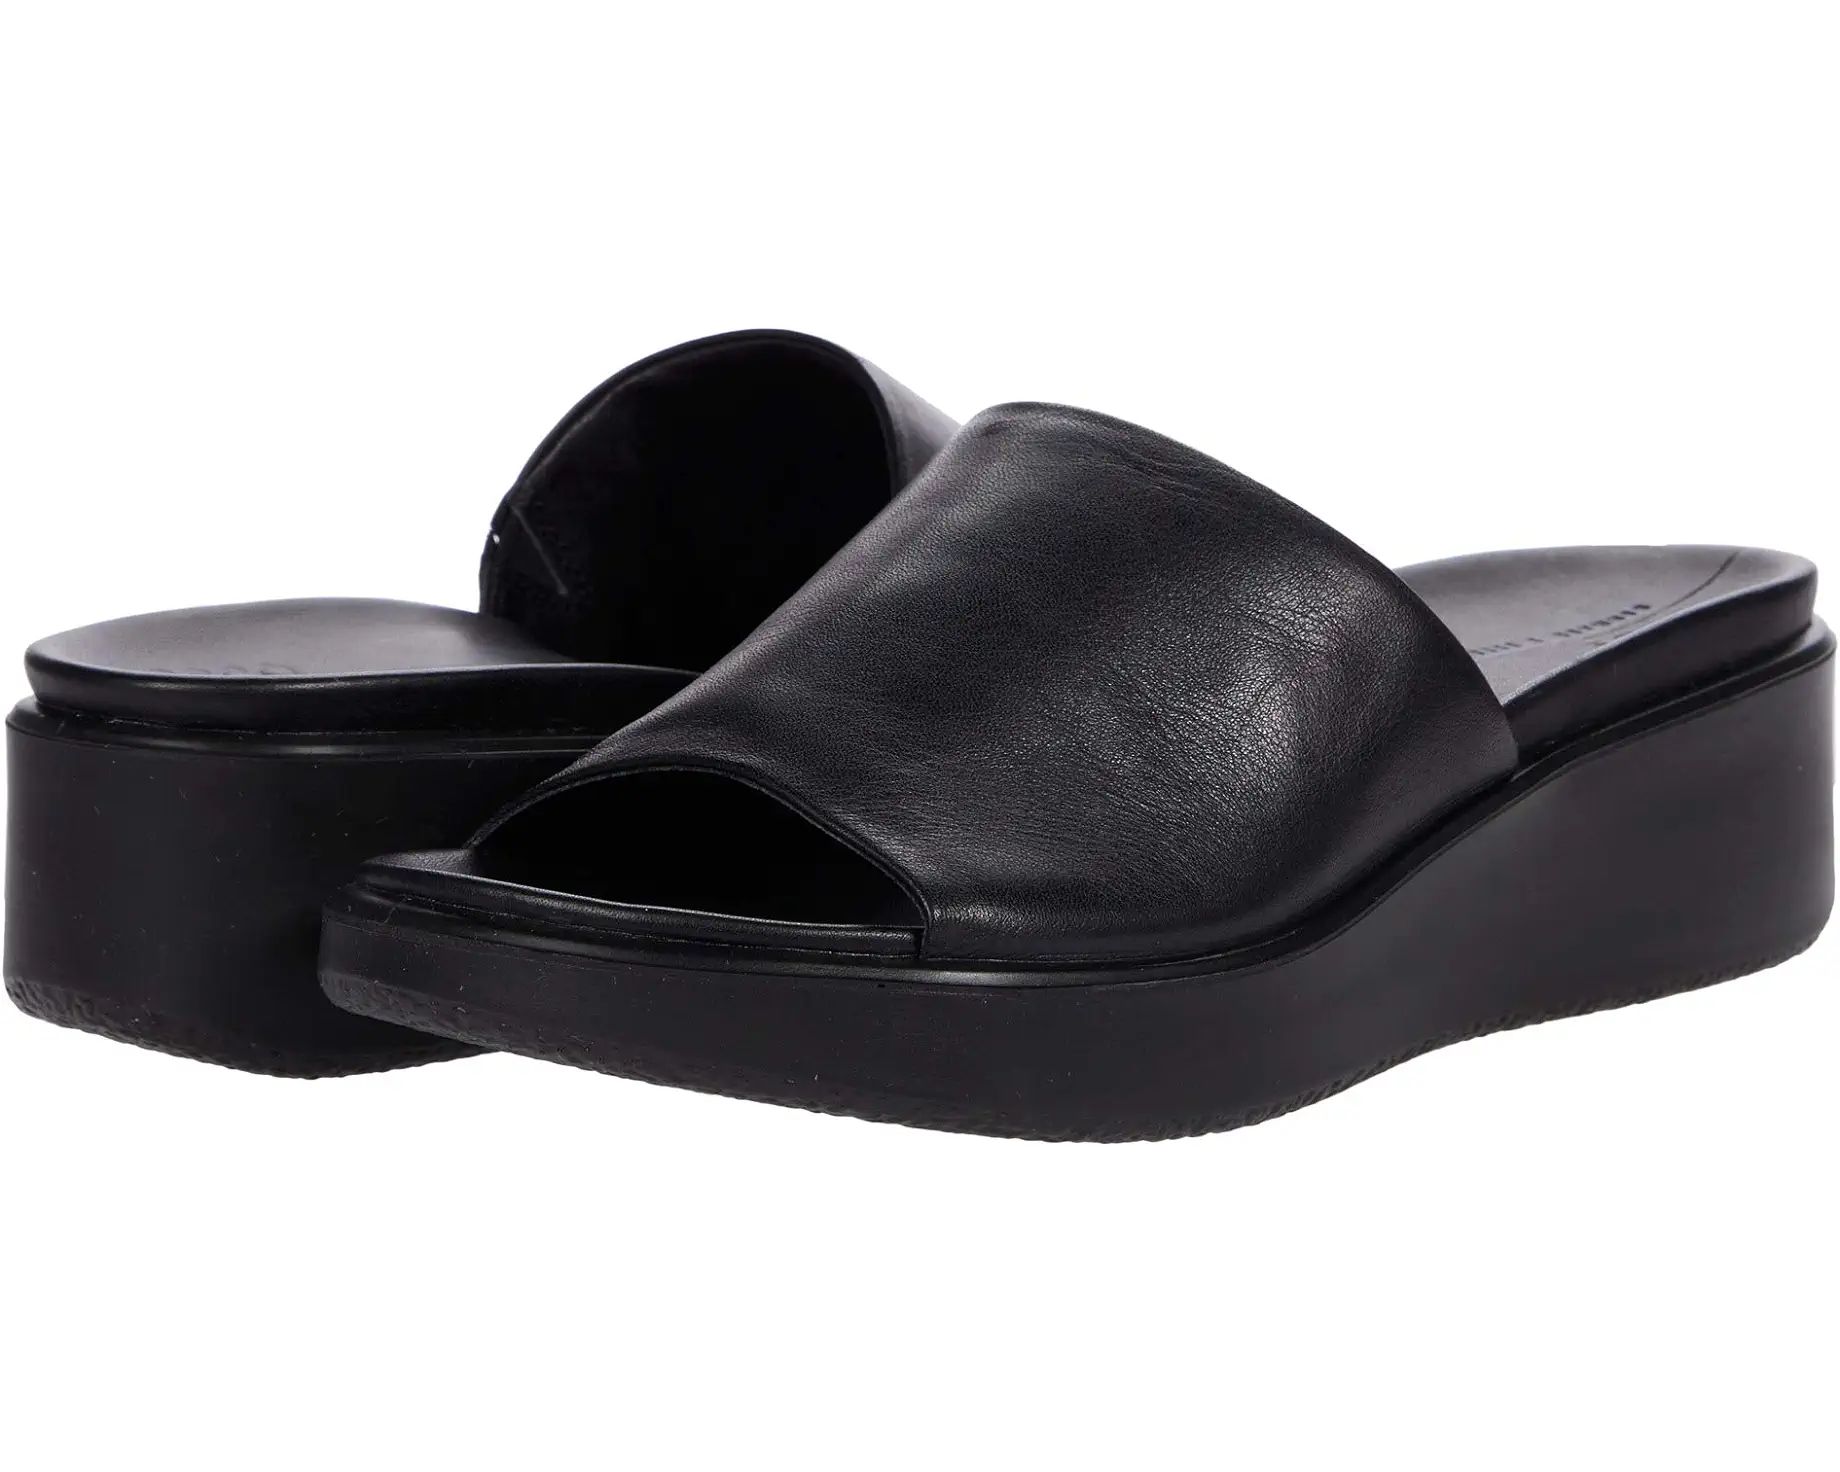 Flowt Luxe Wedge Sandal Slide | Zappos